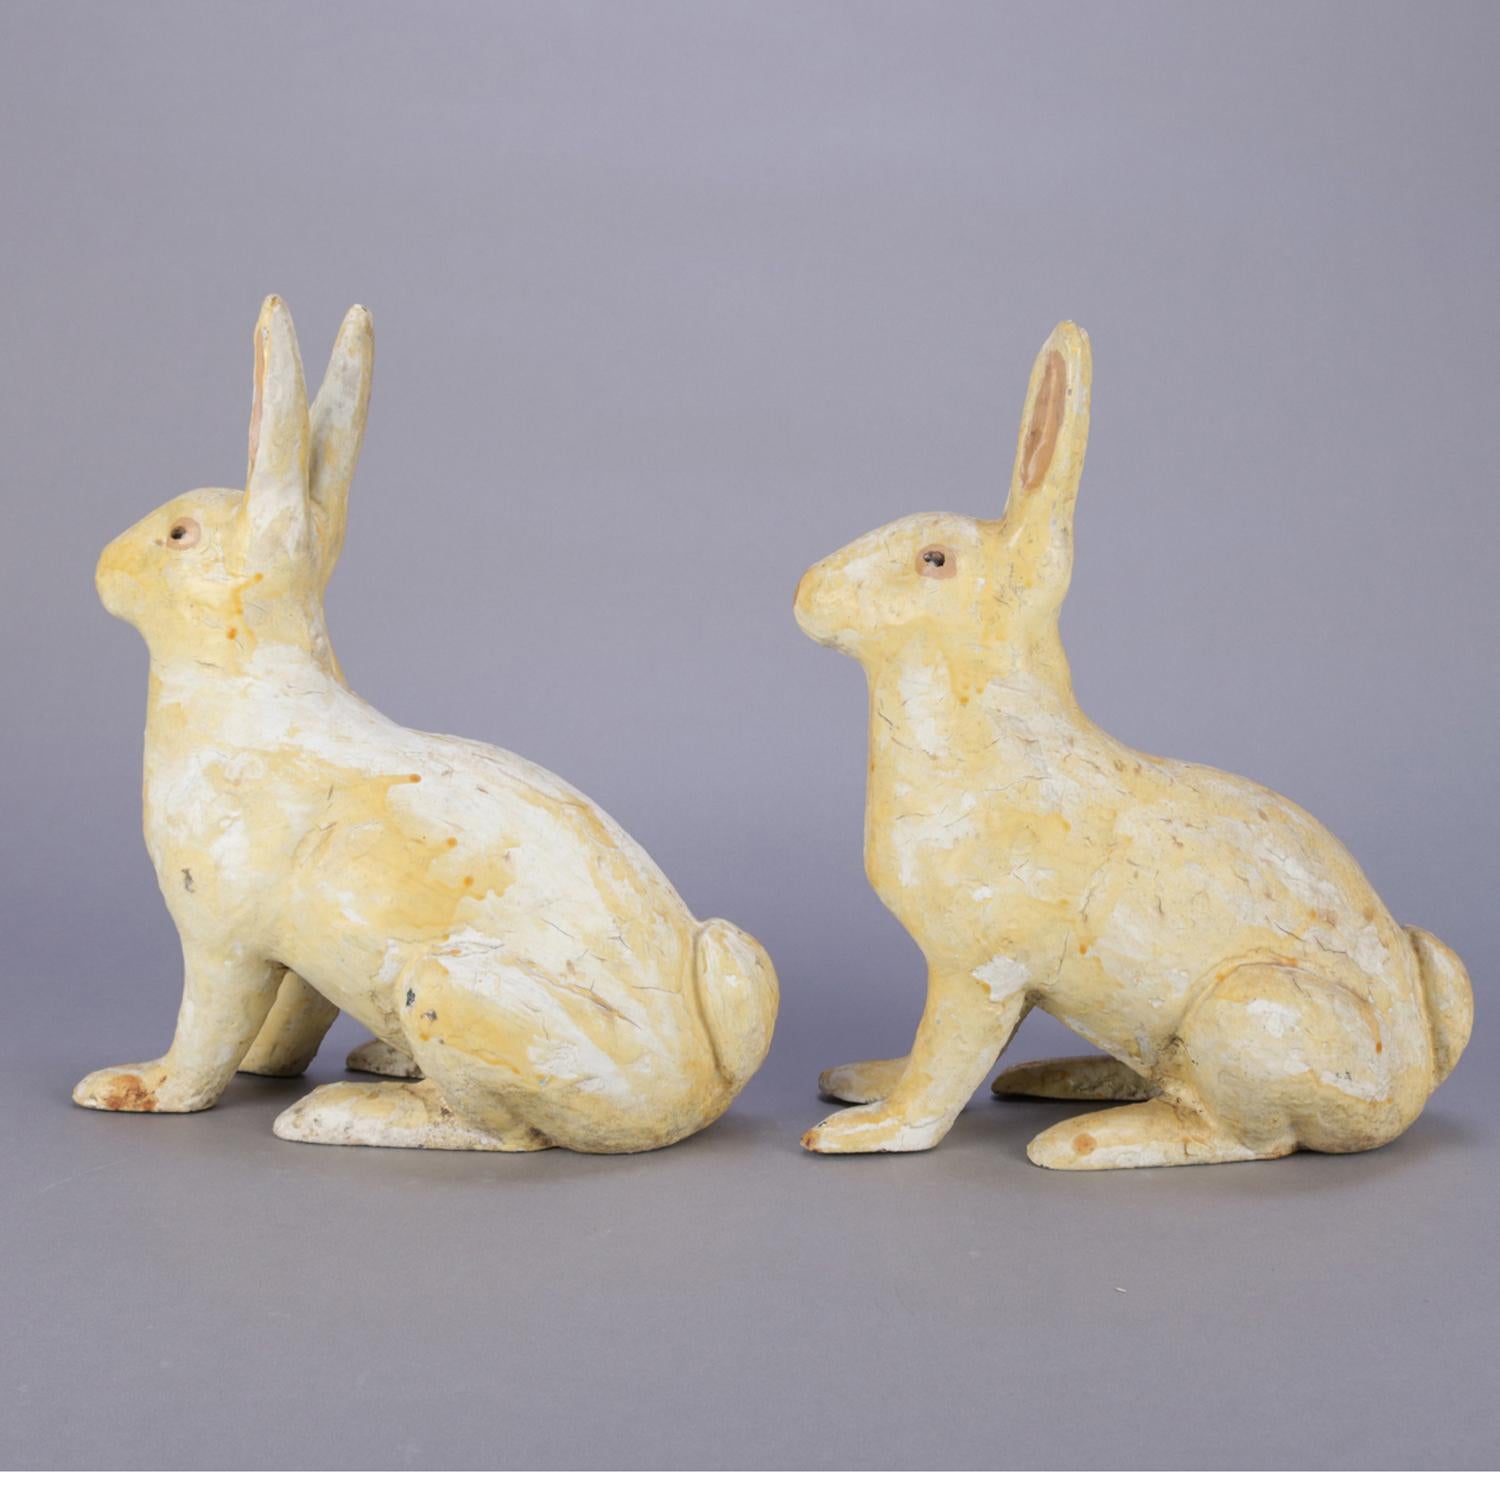 19th Century Pair of Large and Antique Figural Painted Cast Iron Sculptural Rabbit Doorstops